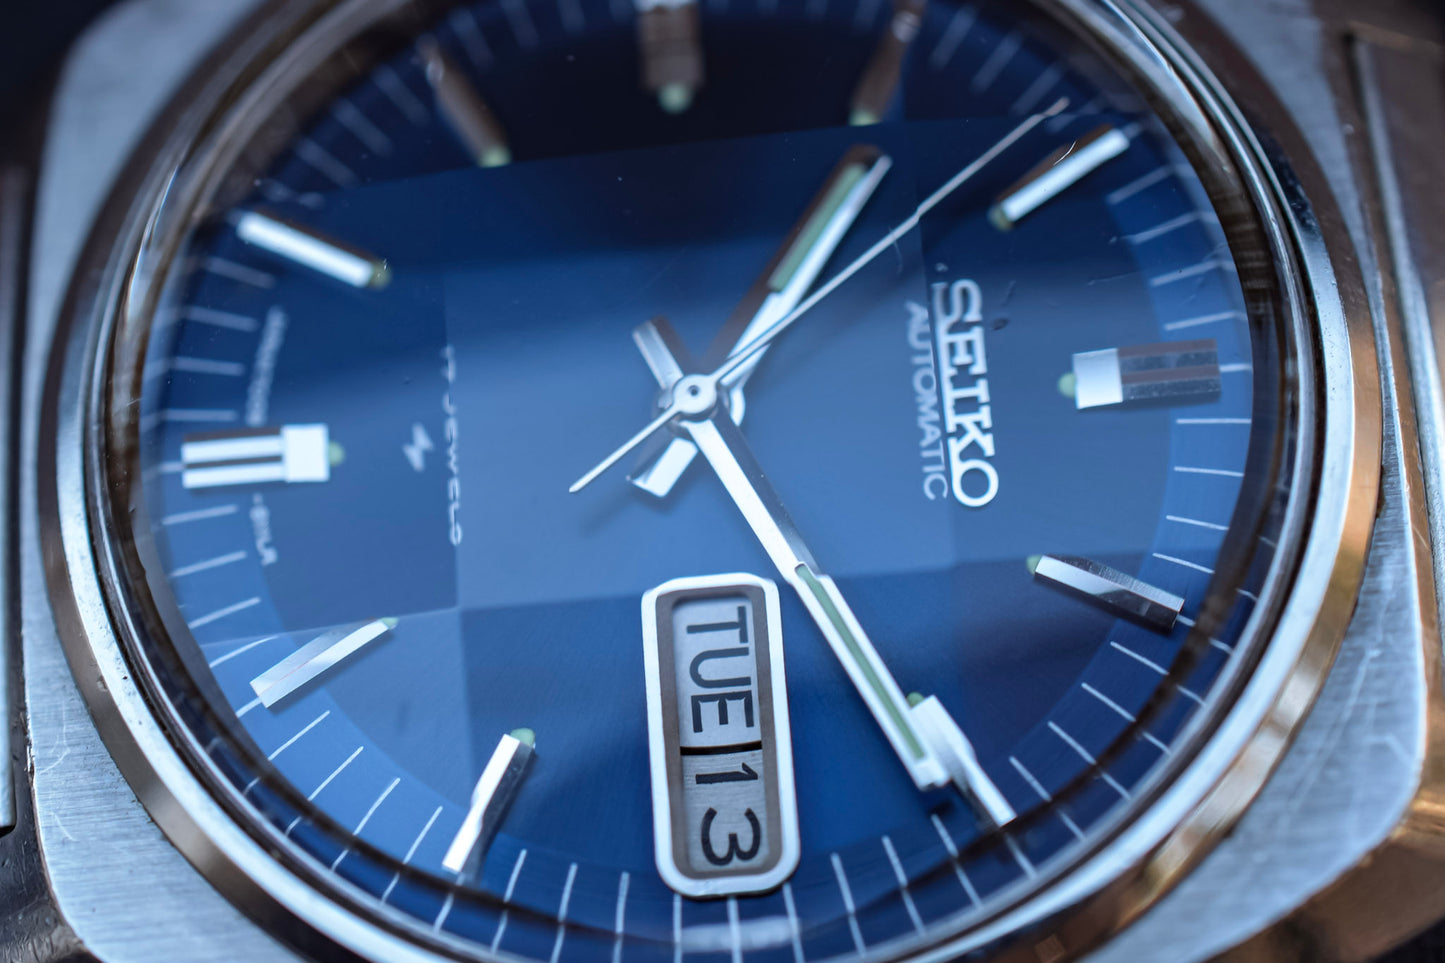 1976 Seiko Automatic Blue Dial Faceted Crystal Day/Date Watch